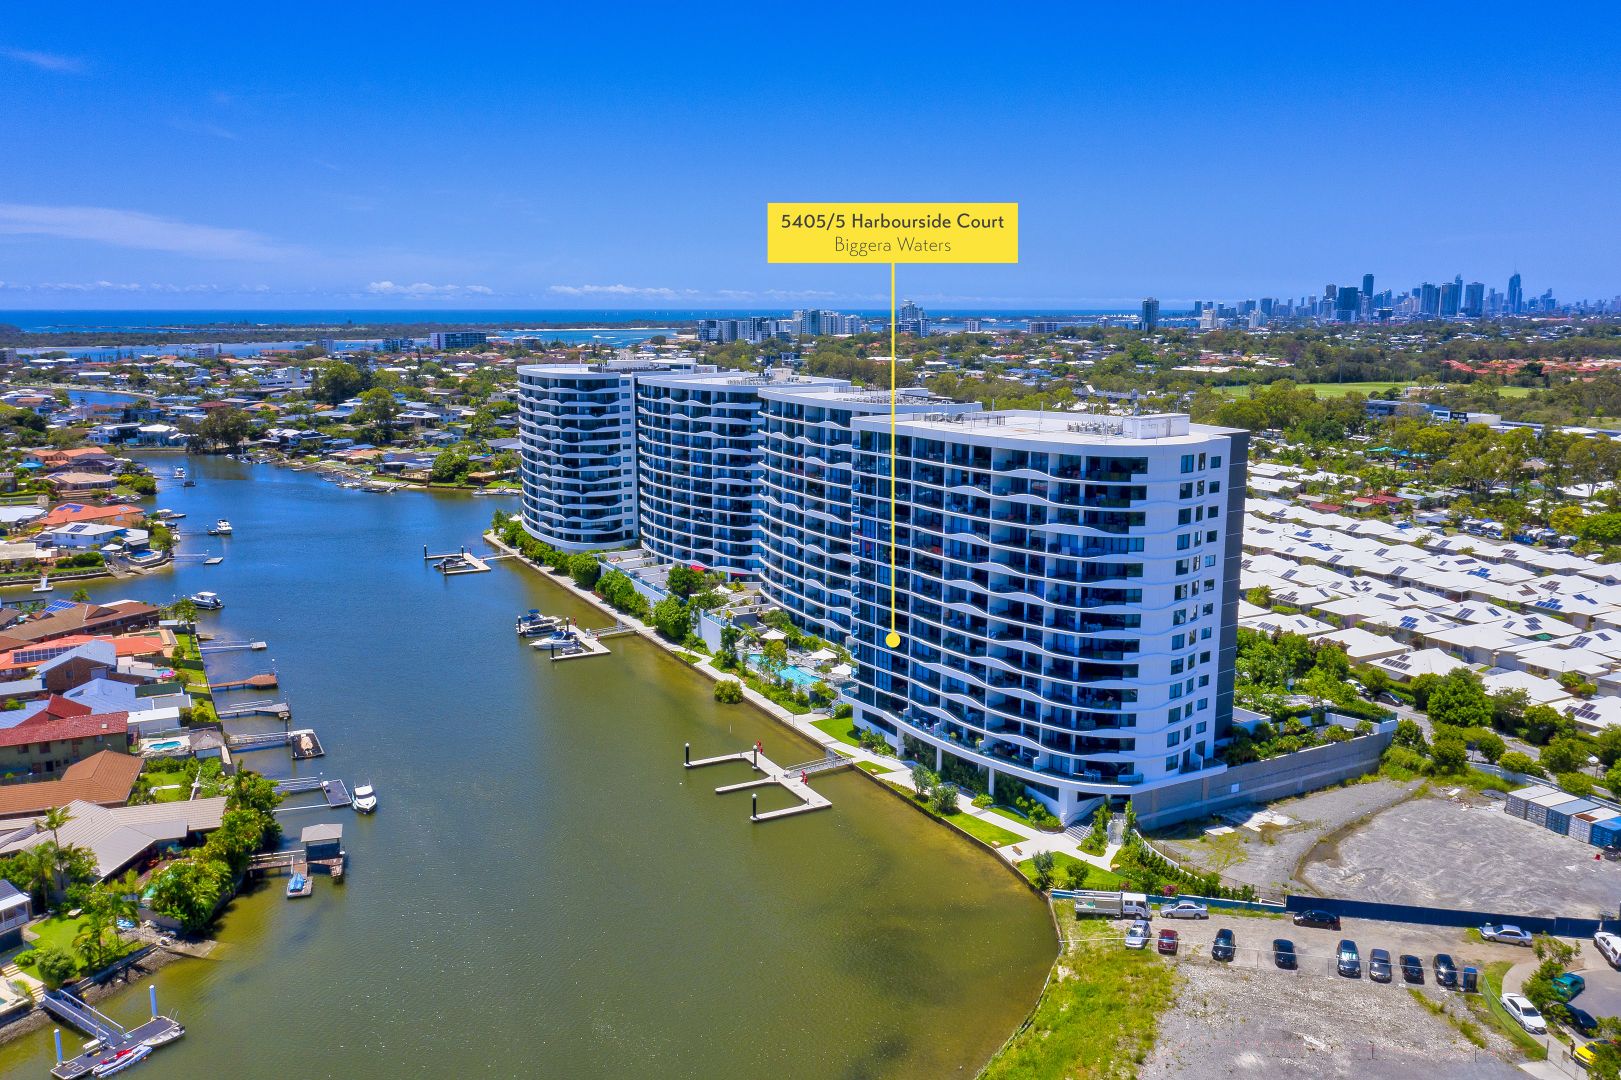 5405/5 Harbour Side Court, Biggera Waters QLD 4216